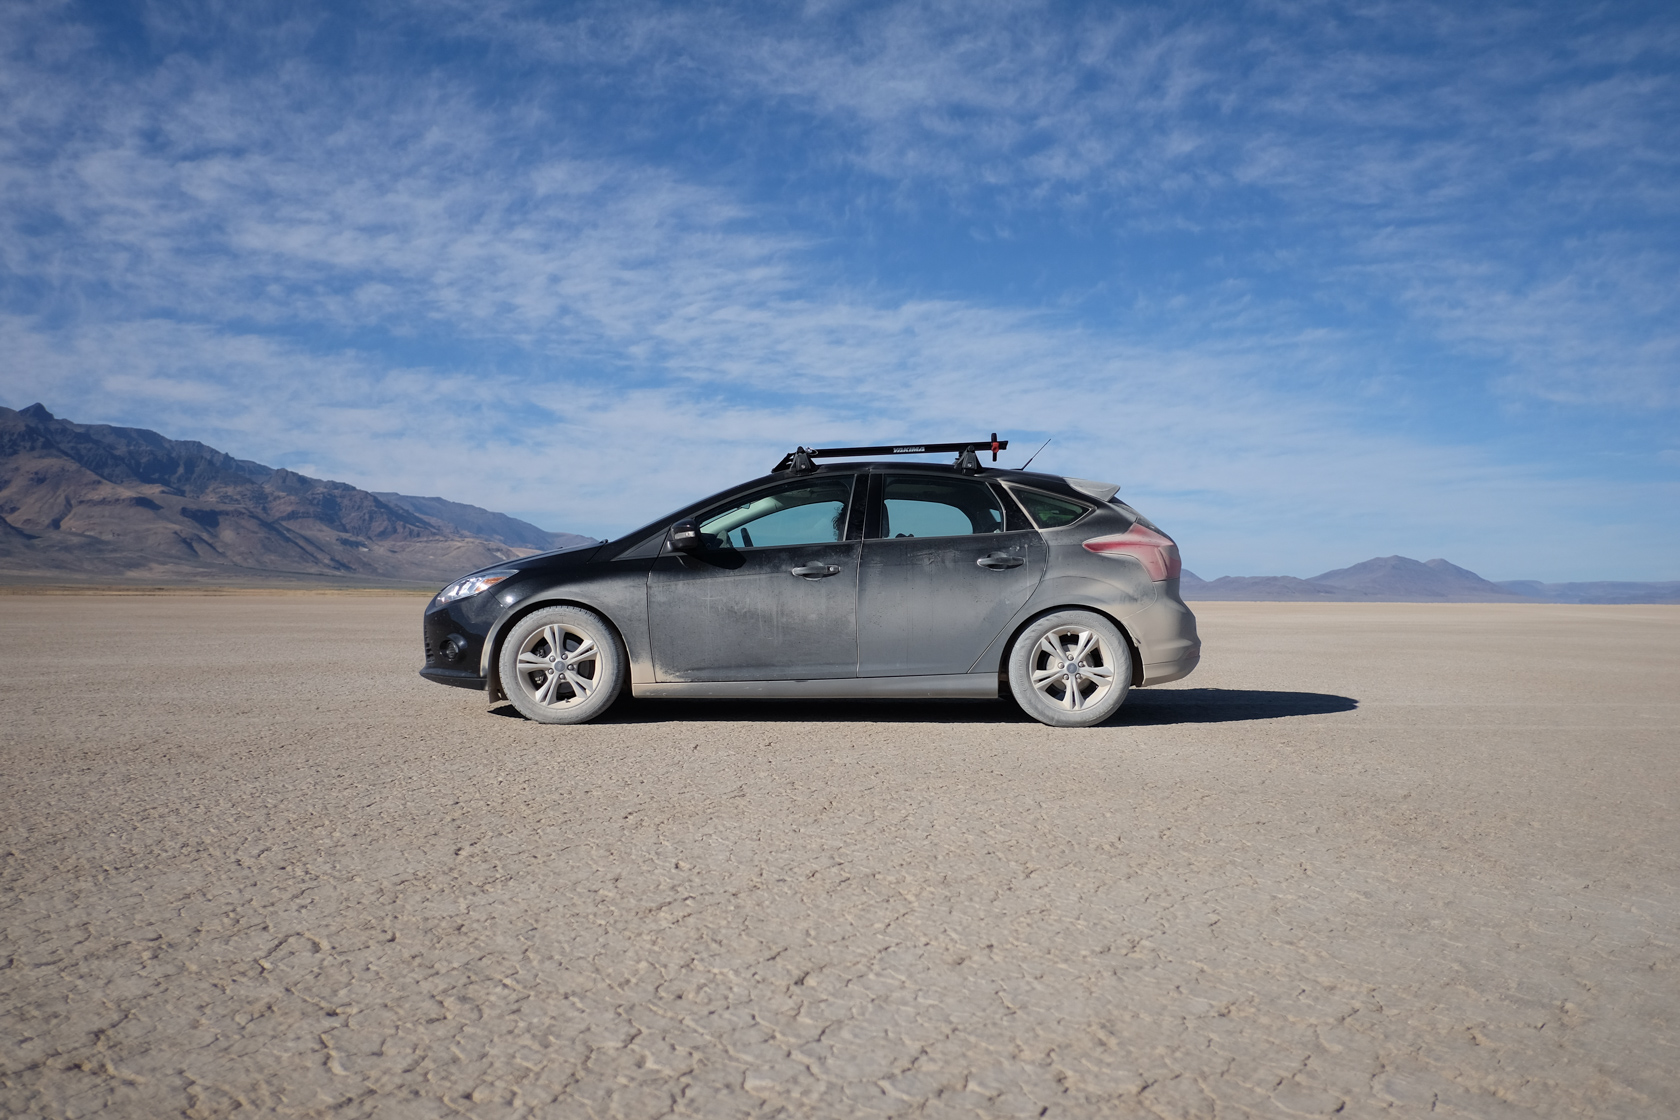 After a hundred plus miles on gravel roads and driving all over the playa, the car was *dirty*. I think it'll carry memories of this trip (in the form of dust) for as long as we own it.